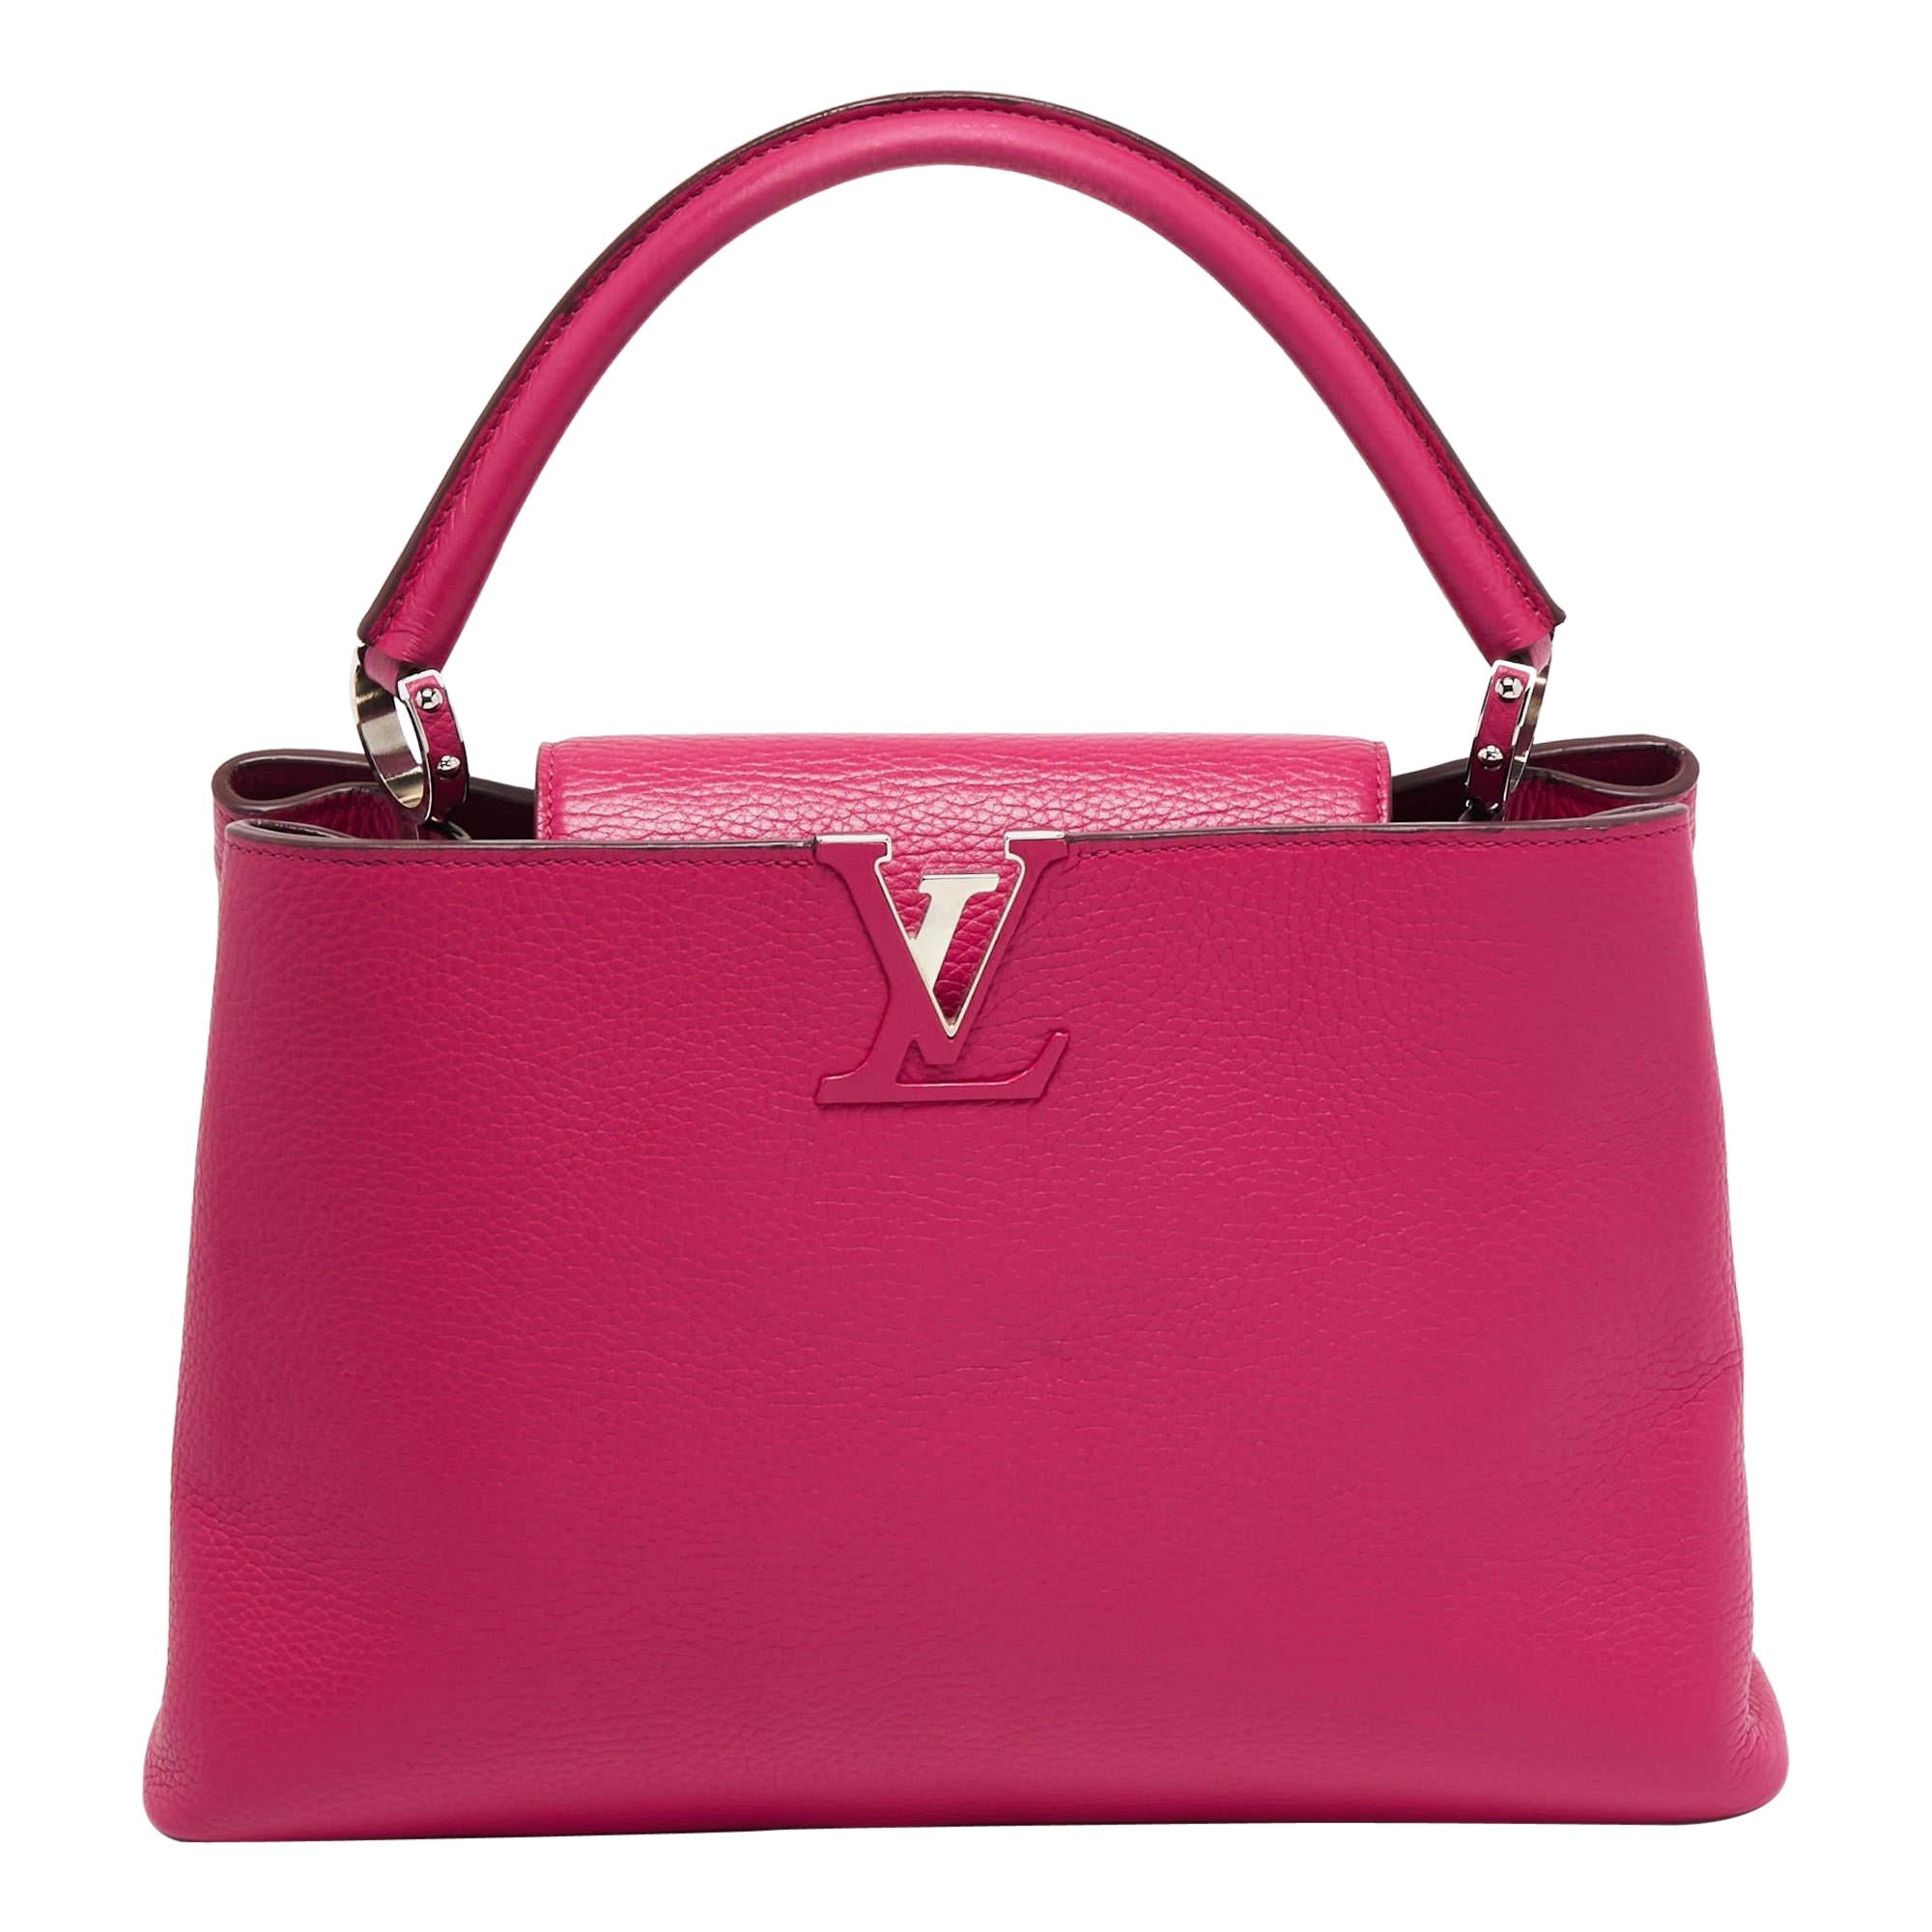 Louis Vuitton Pink Taurillon Leather Capucines MM Bag